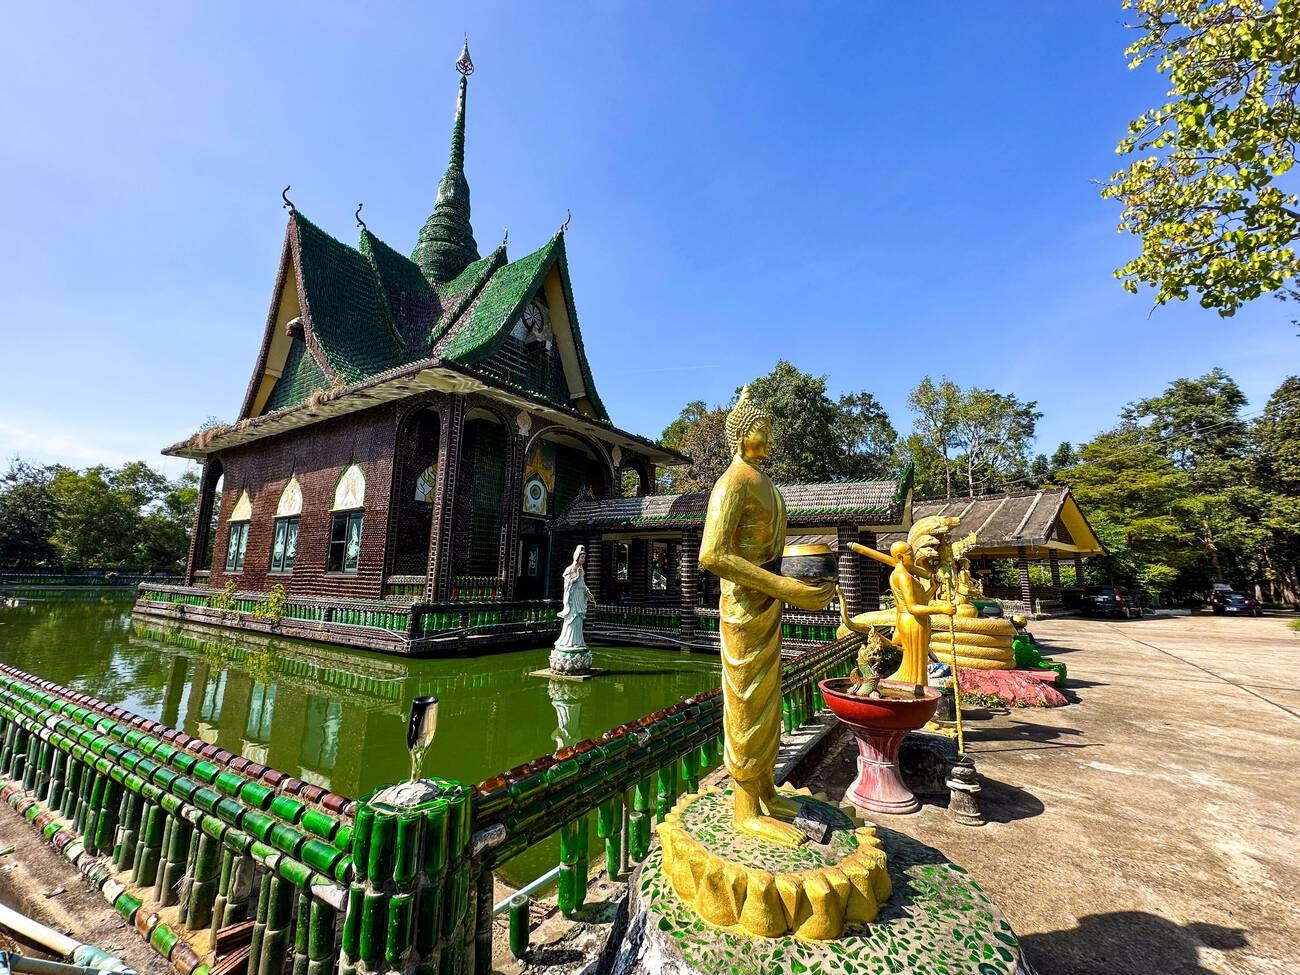 World’s 1st Temple of Beer Bottles in Thailand